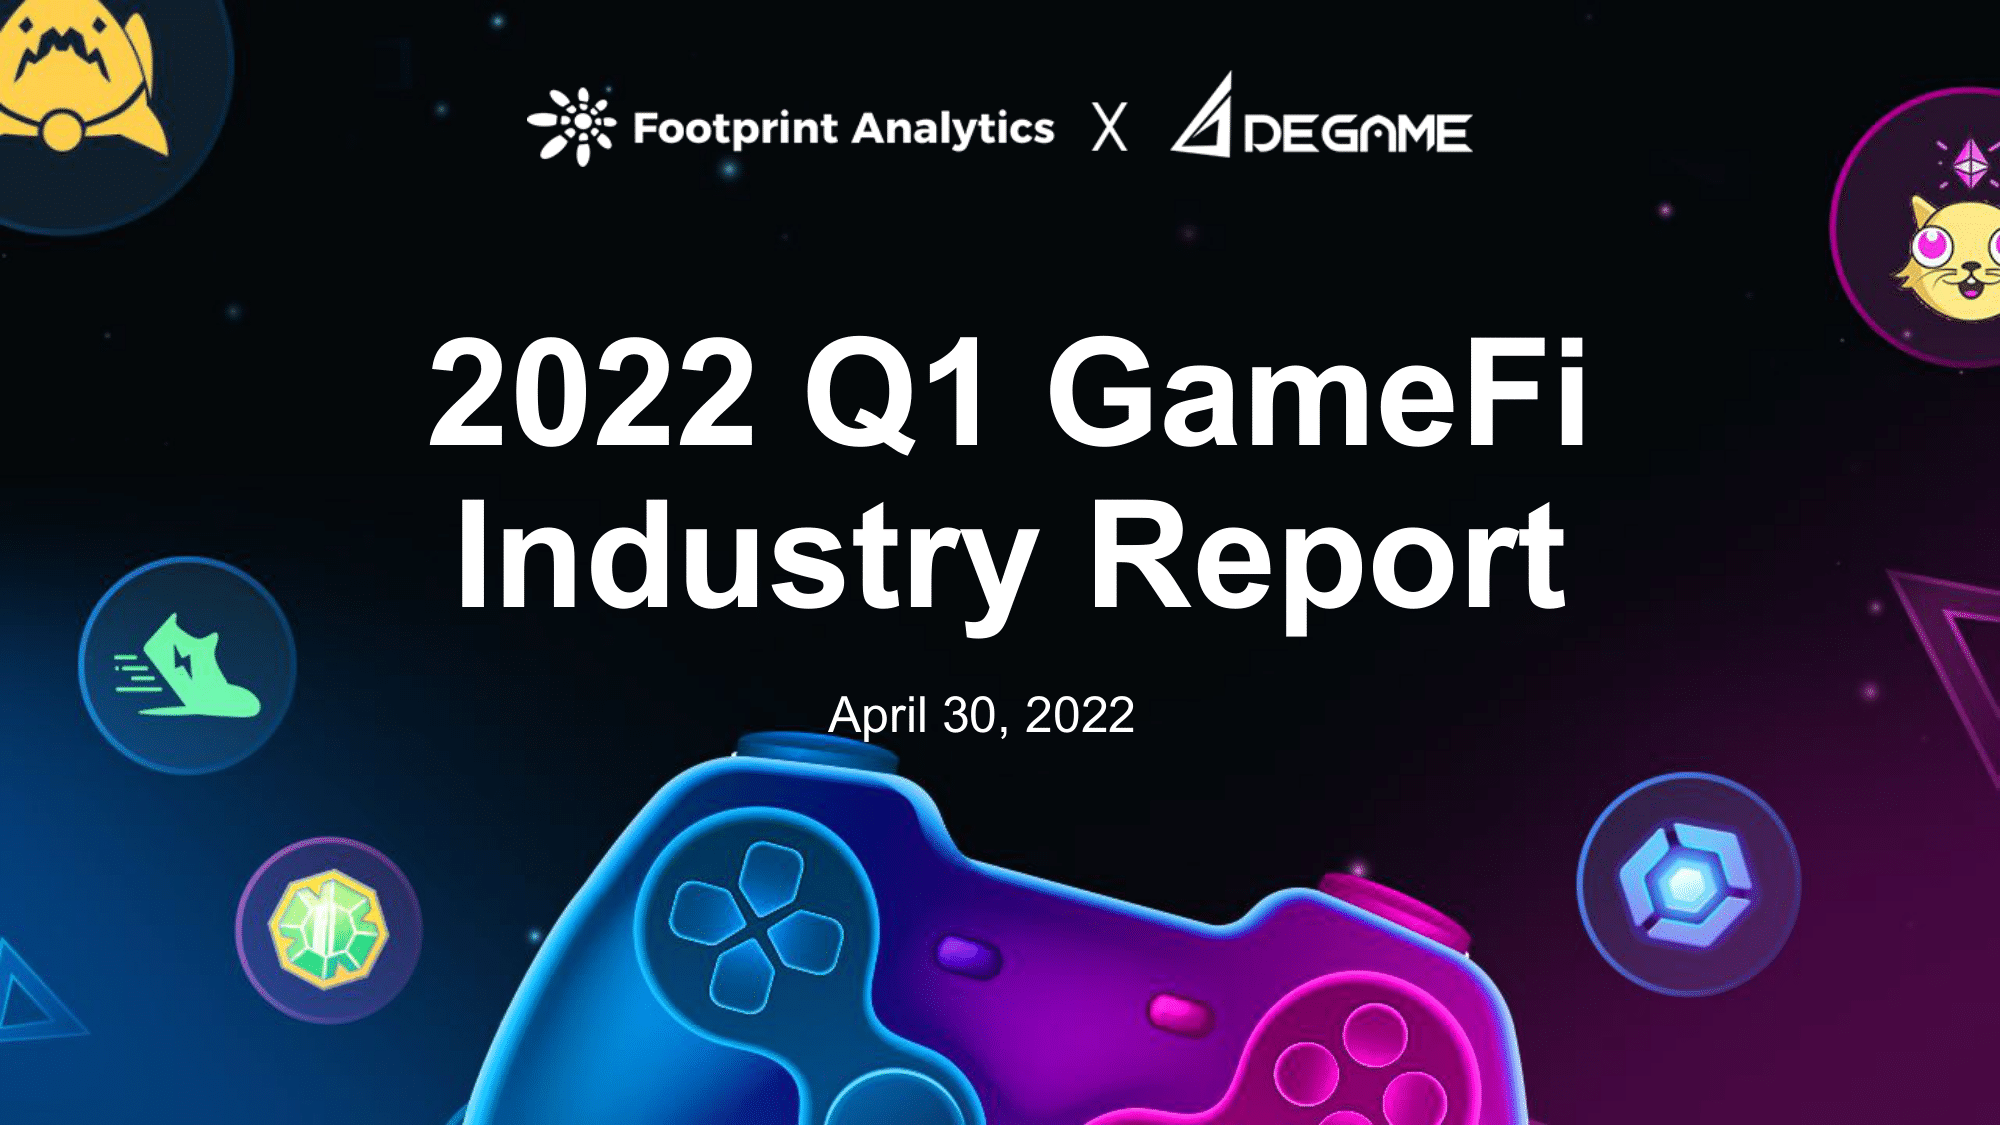 2022 Q1 GameFi Industry Report by Footprint Analytics and DeGame